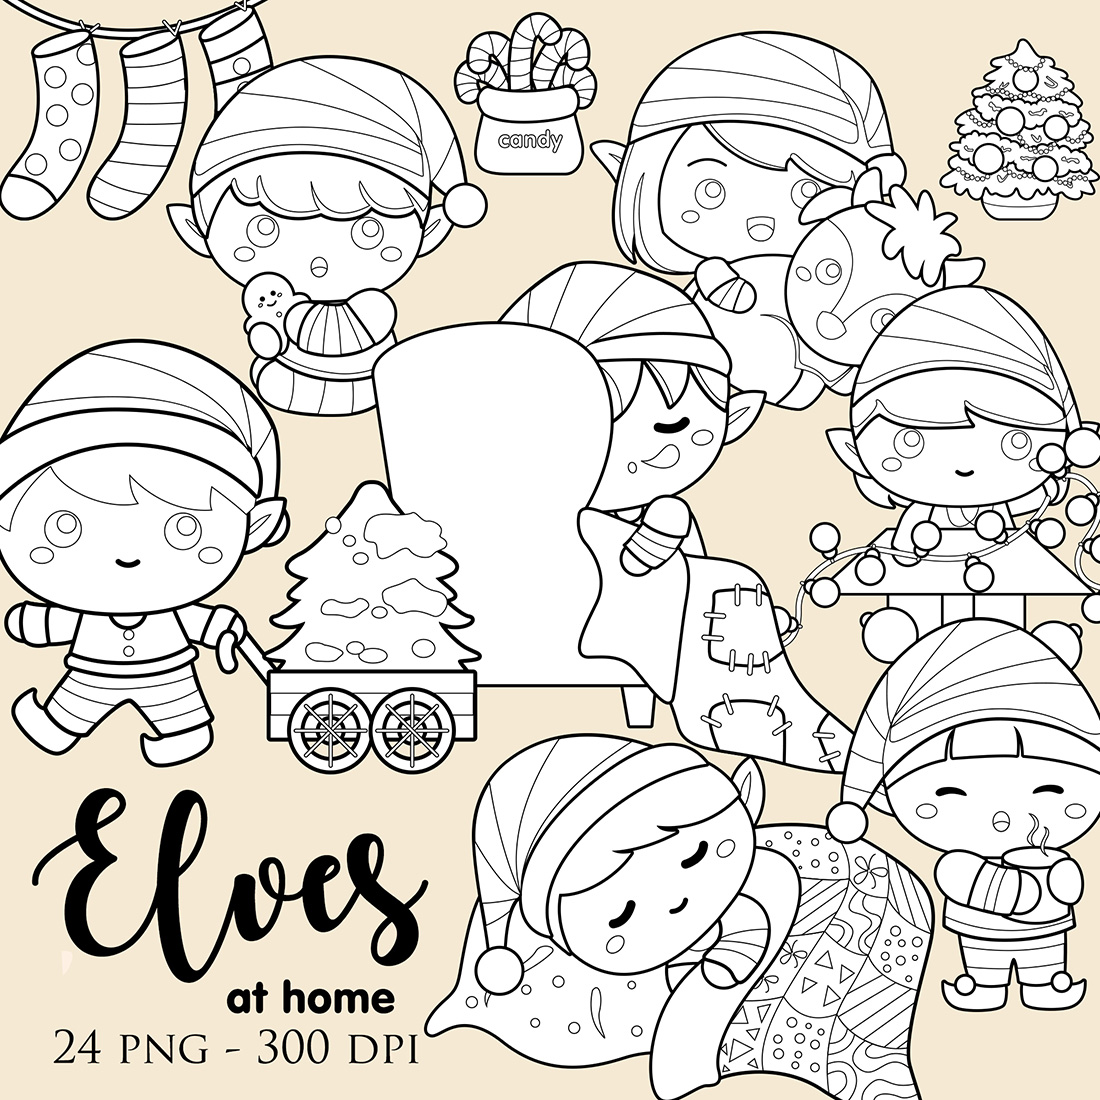 Cute Kids Christmas Elf Holiday Decoration Home Background Cartoon Digital Stamp Outline Black and White cover image.